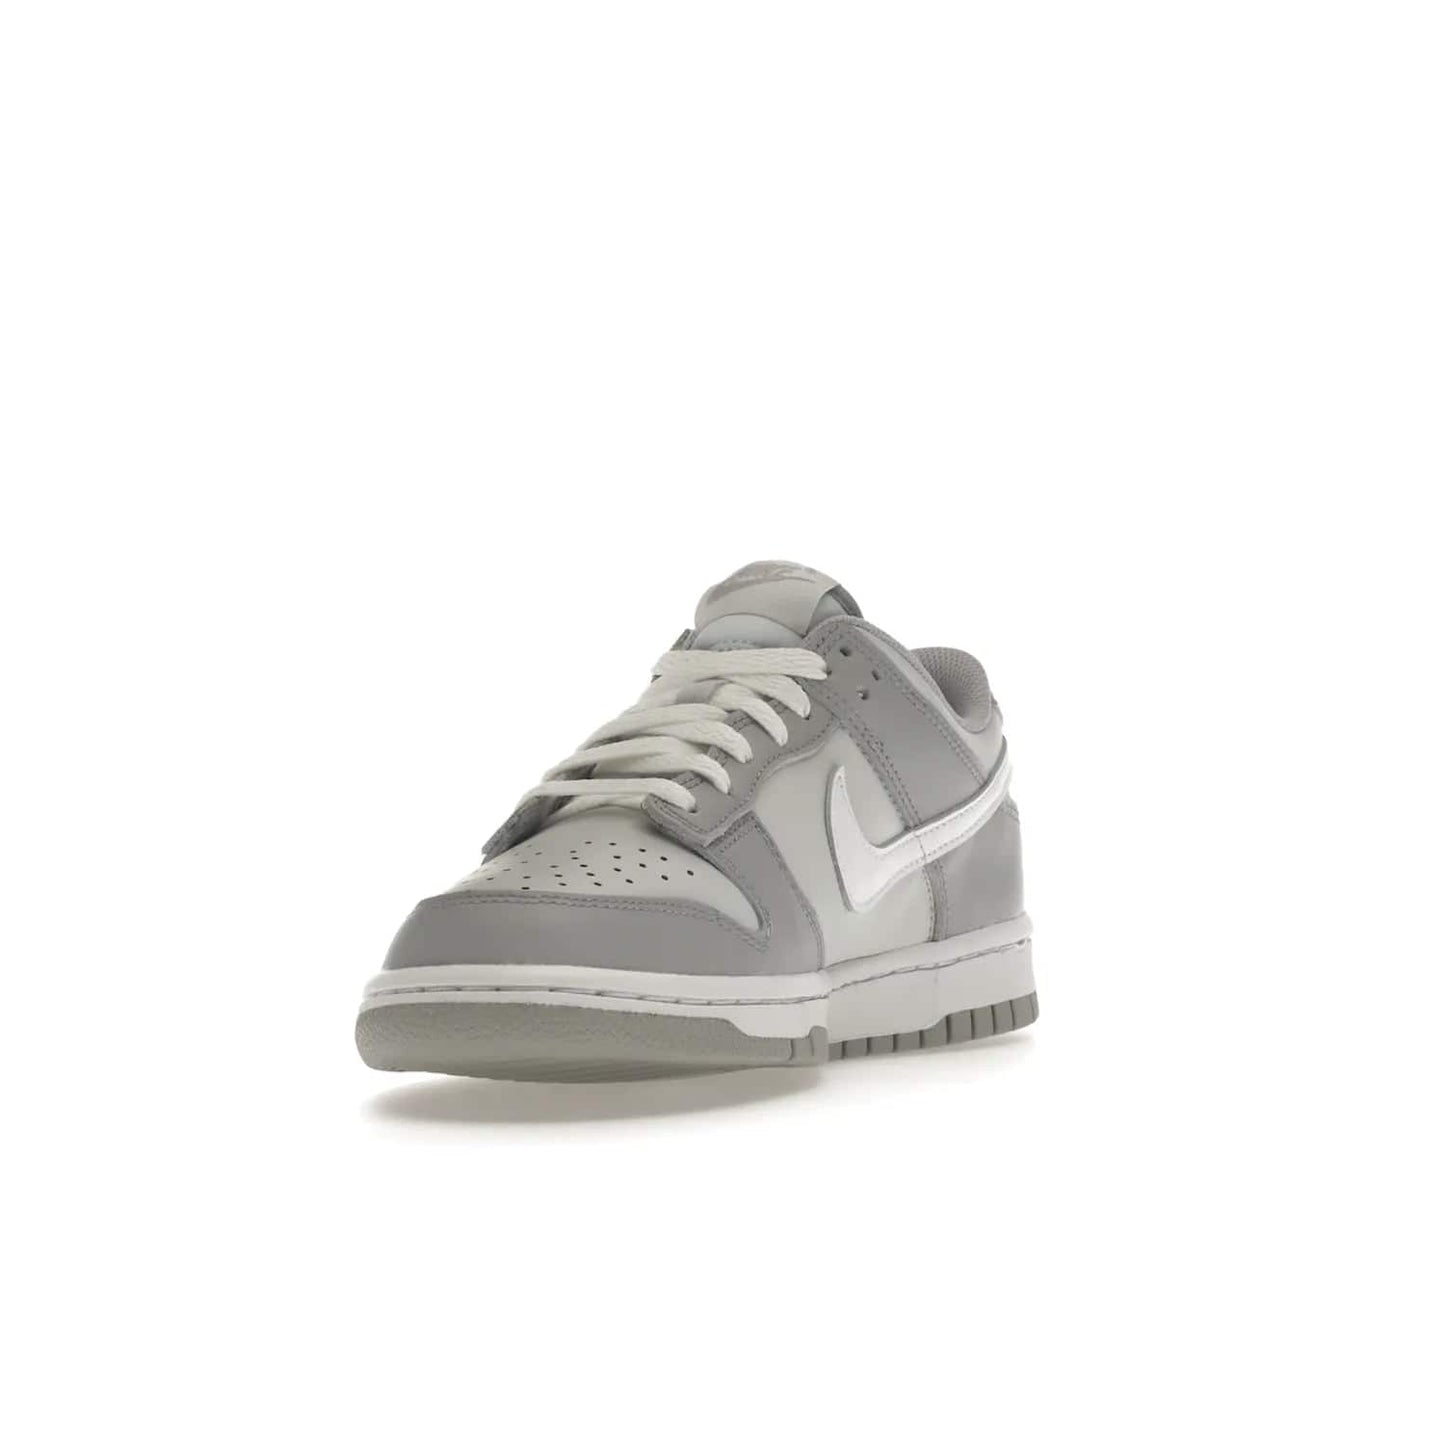 Nike Dunk Low Two-Toned Grey (GS) - Image 13 - Only at www.BallersClubKickz.com - Stylish Nike Dunk Low GS Two-Toned Grey featuring leather build, light/dark grey shades, white Swoosh logo & gray rubber outsole. Get ready to make a statement with this timeless classic released in March 2022.